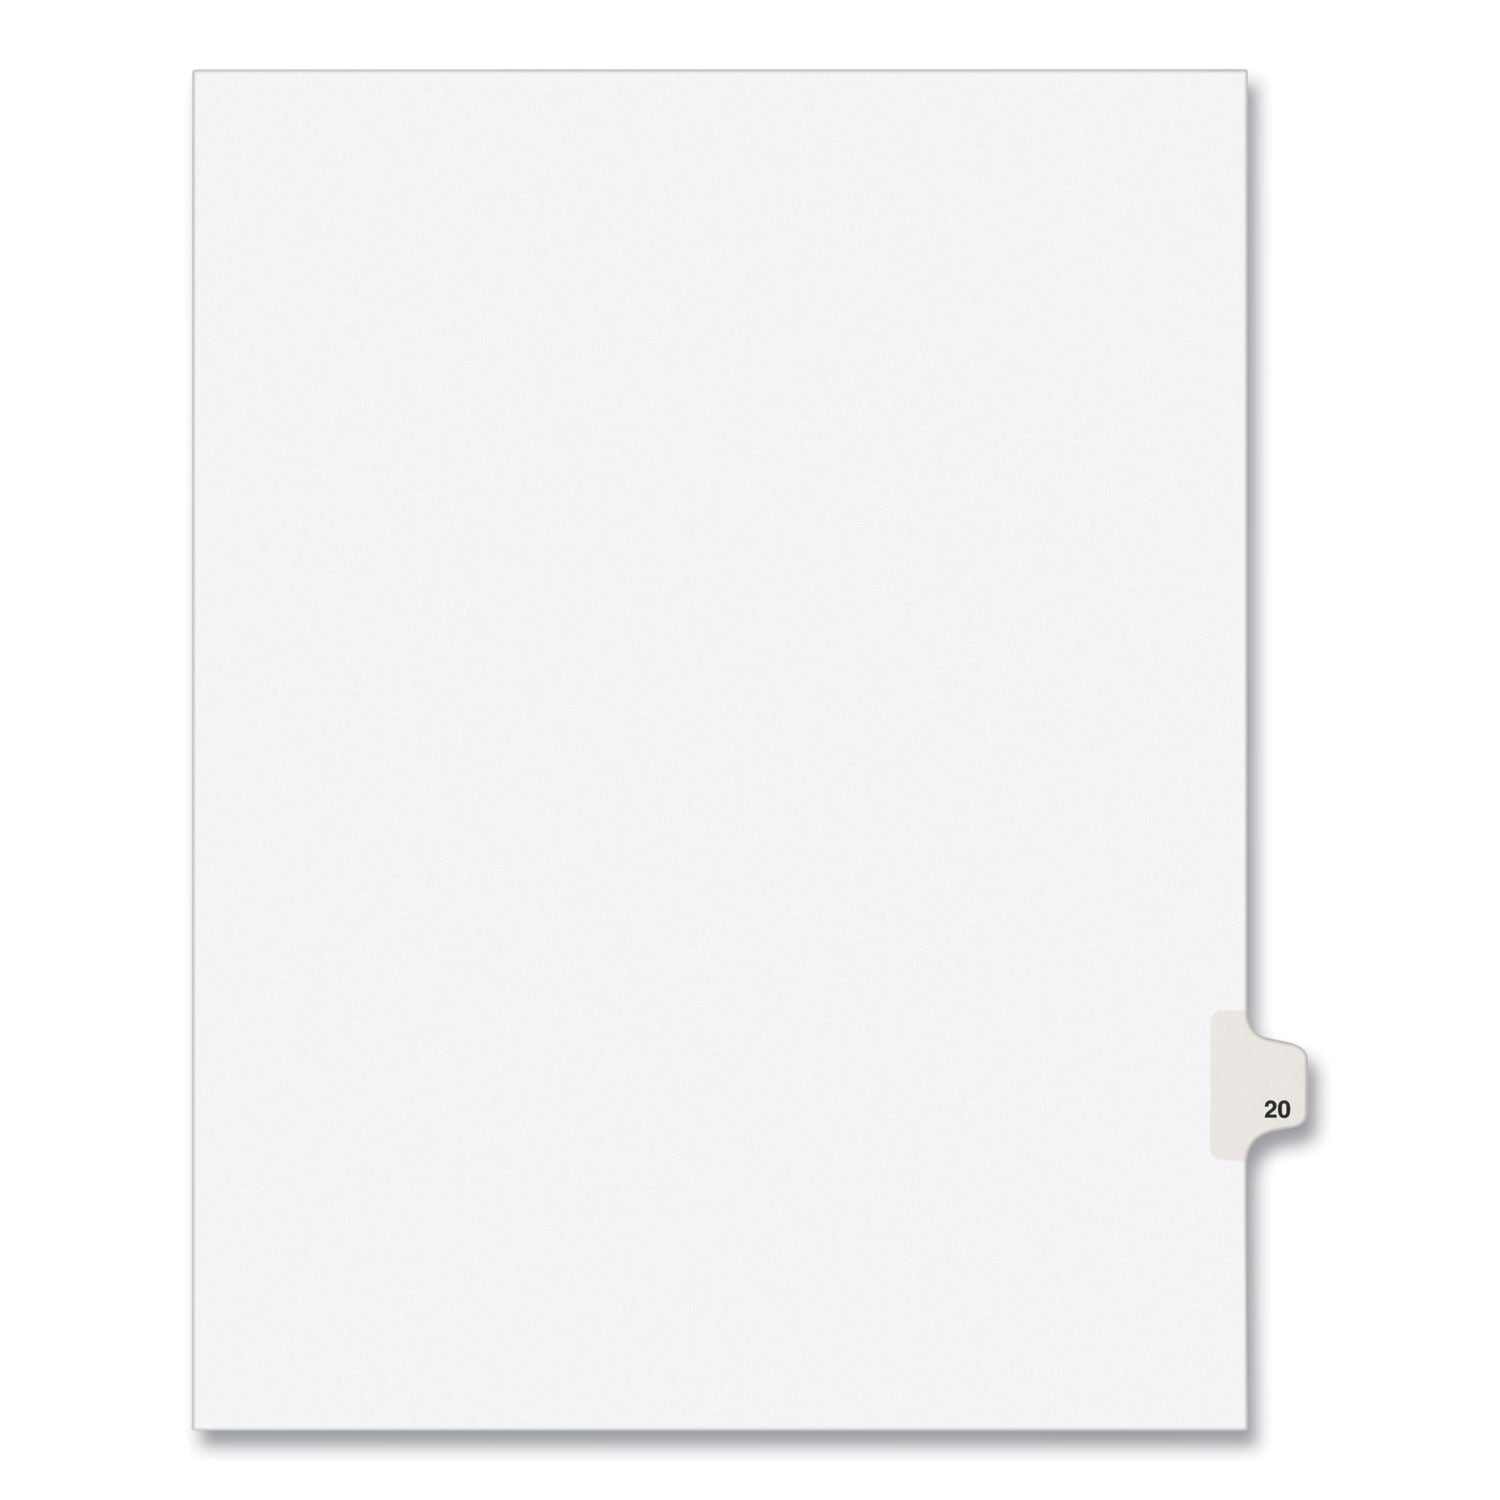 Preprinted Legal Exhibit Side Tab Index Dividers, Avery Style, 10-Tab, 20, 11 x 8.5, White, 25/Pack, (1020) - 